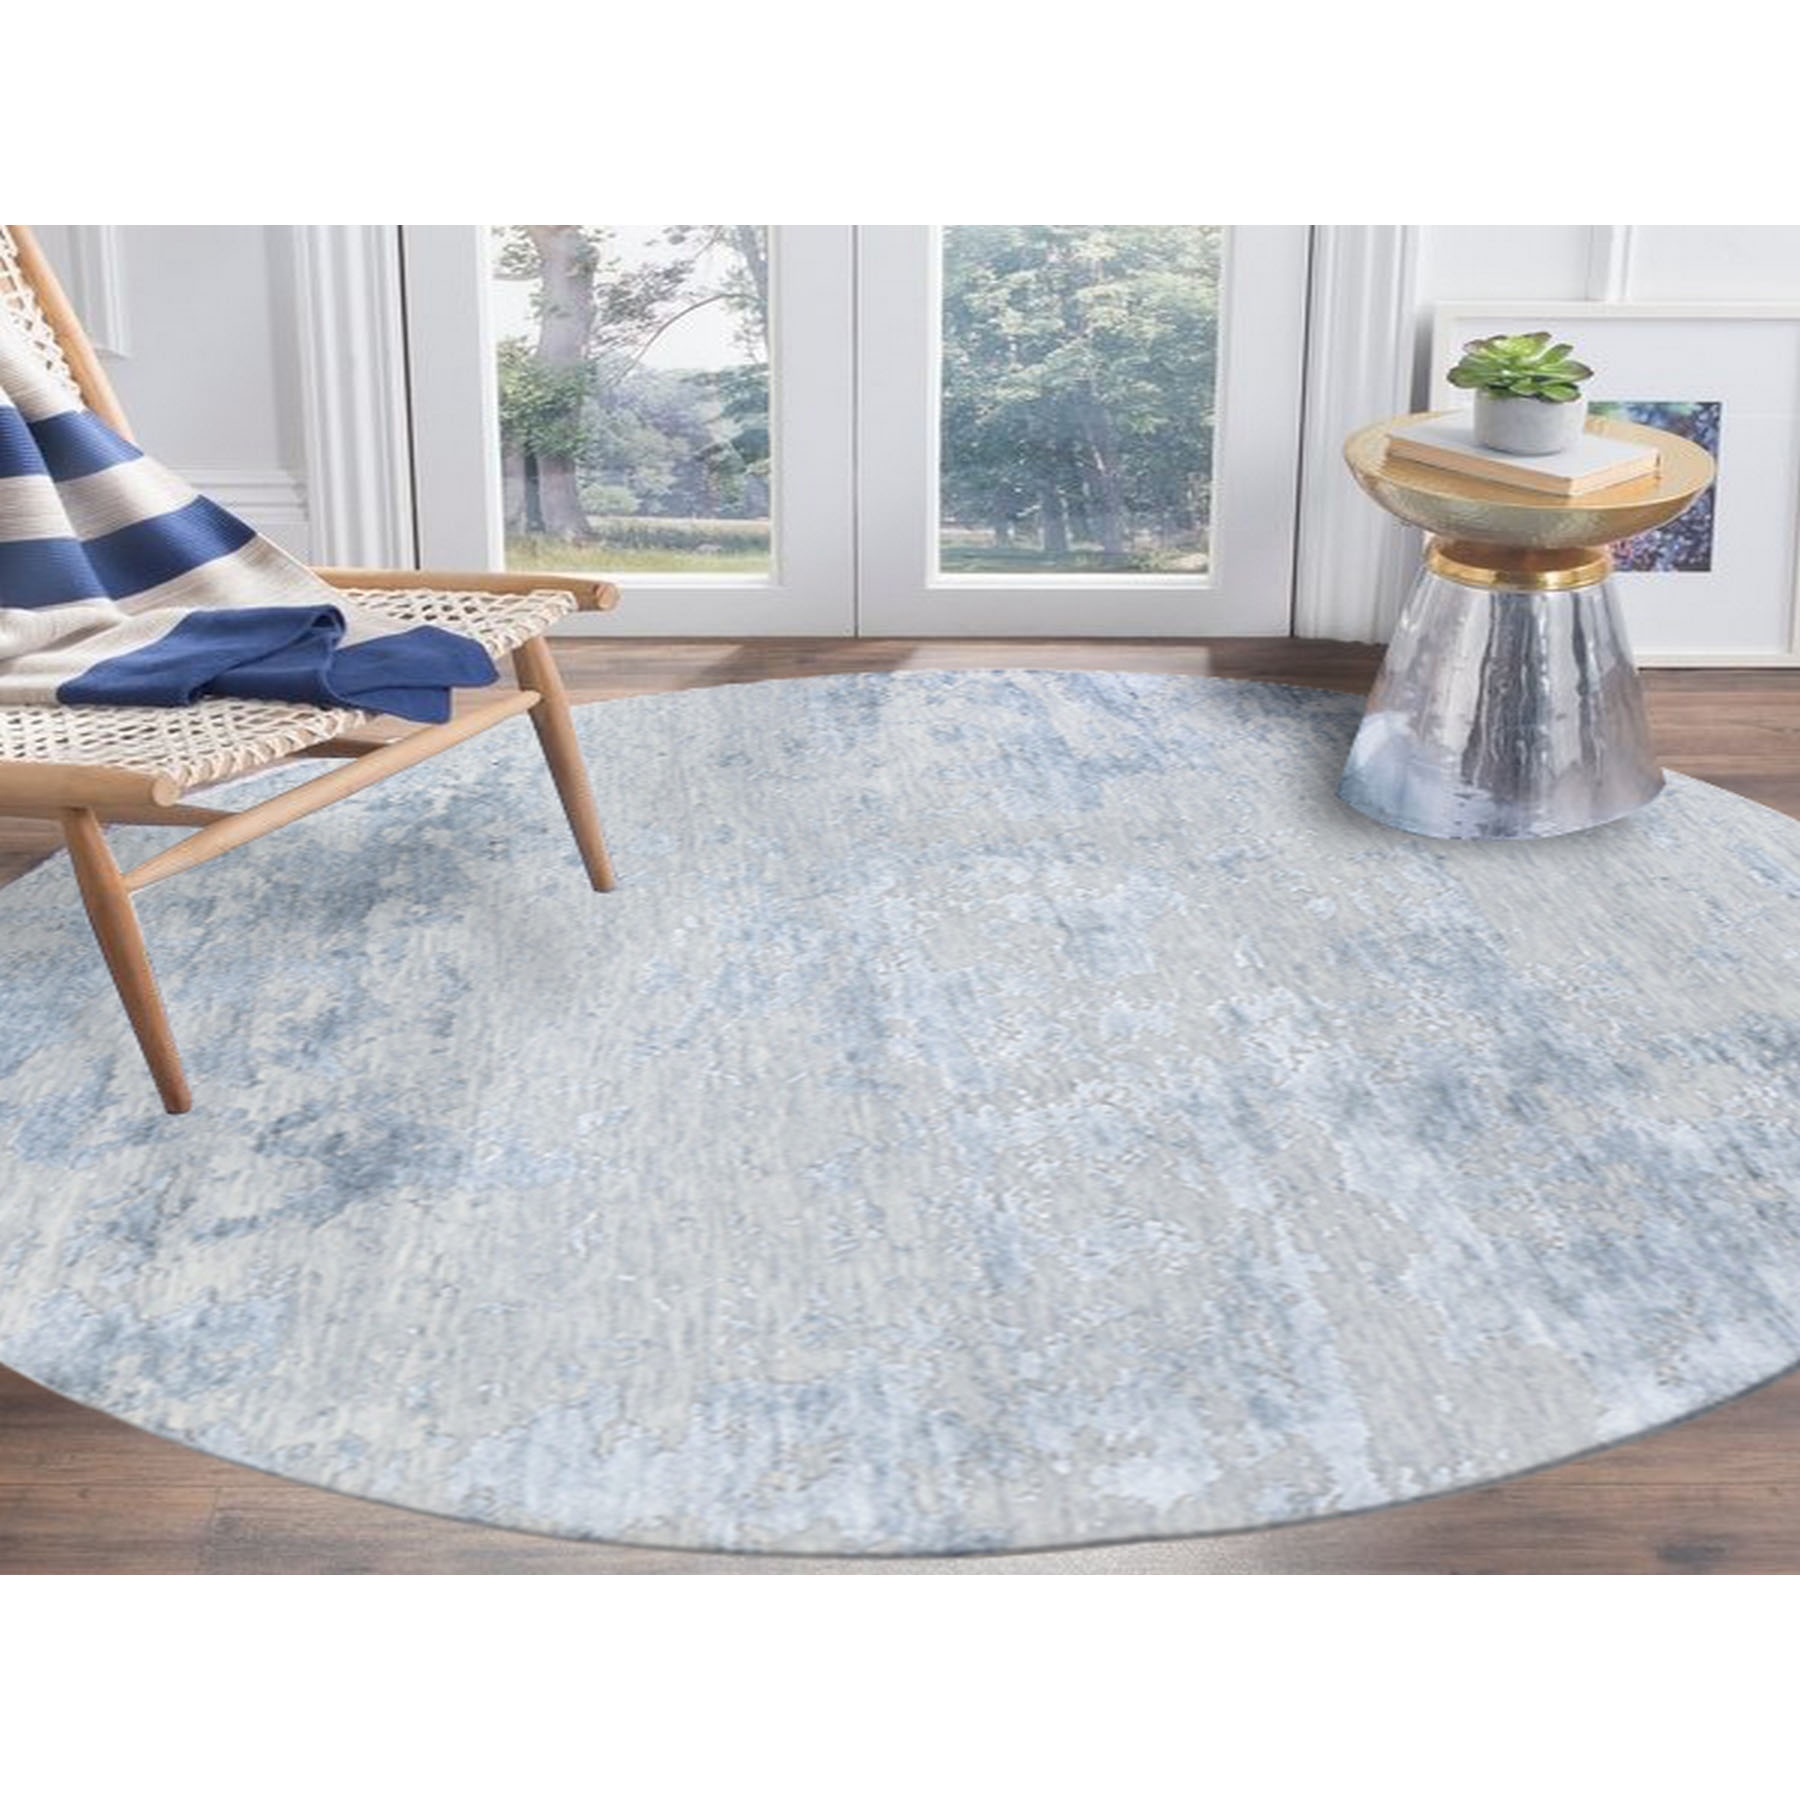 7'10"x7'10" Round Abstract Design Wool And Silk Hi-Low Pile Denser Weave Hand Woven Oriental Rug 